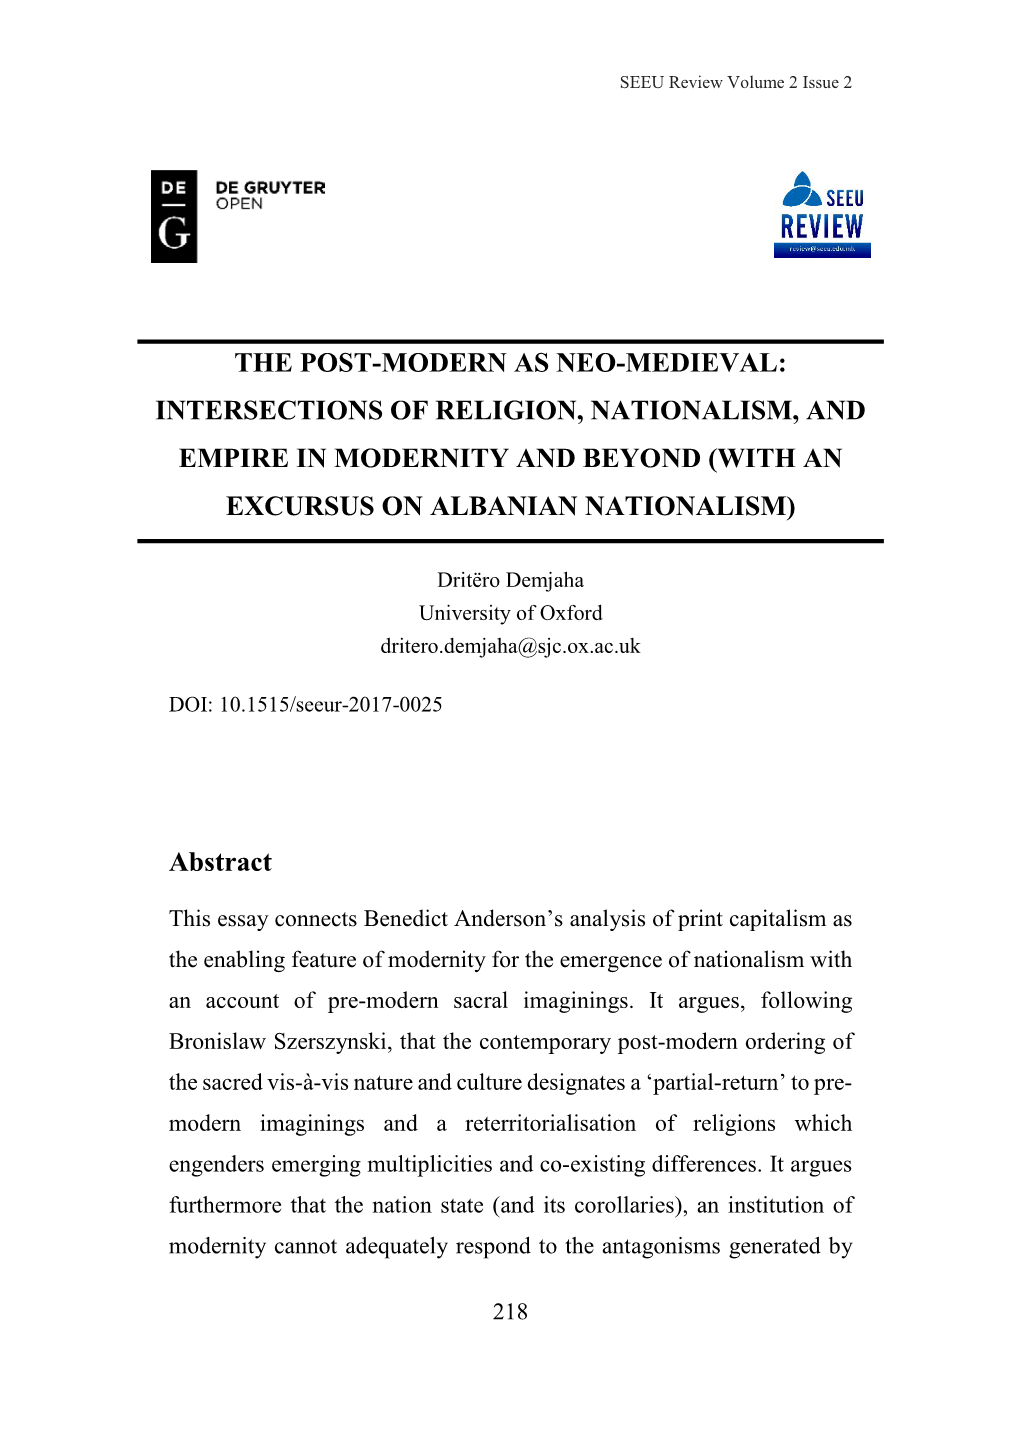 Intersections of Religion, Nationalism, and Empire in Modernity and Beyond (With an Excursus on Albanian Nationalism)